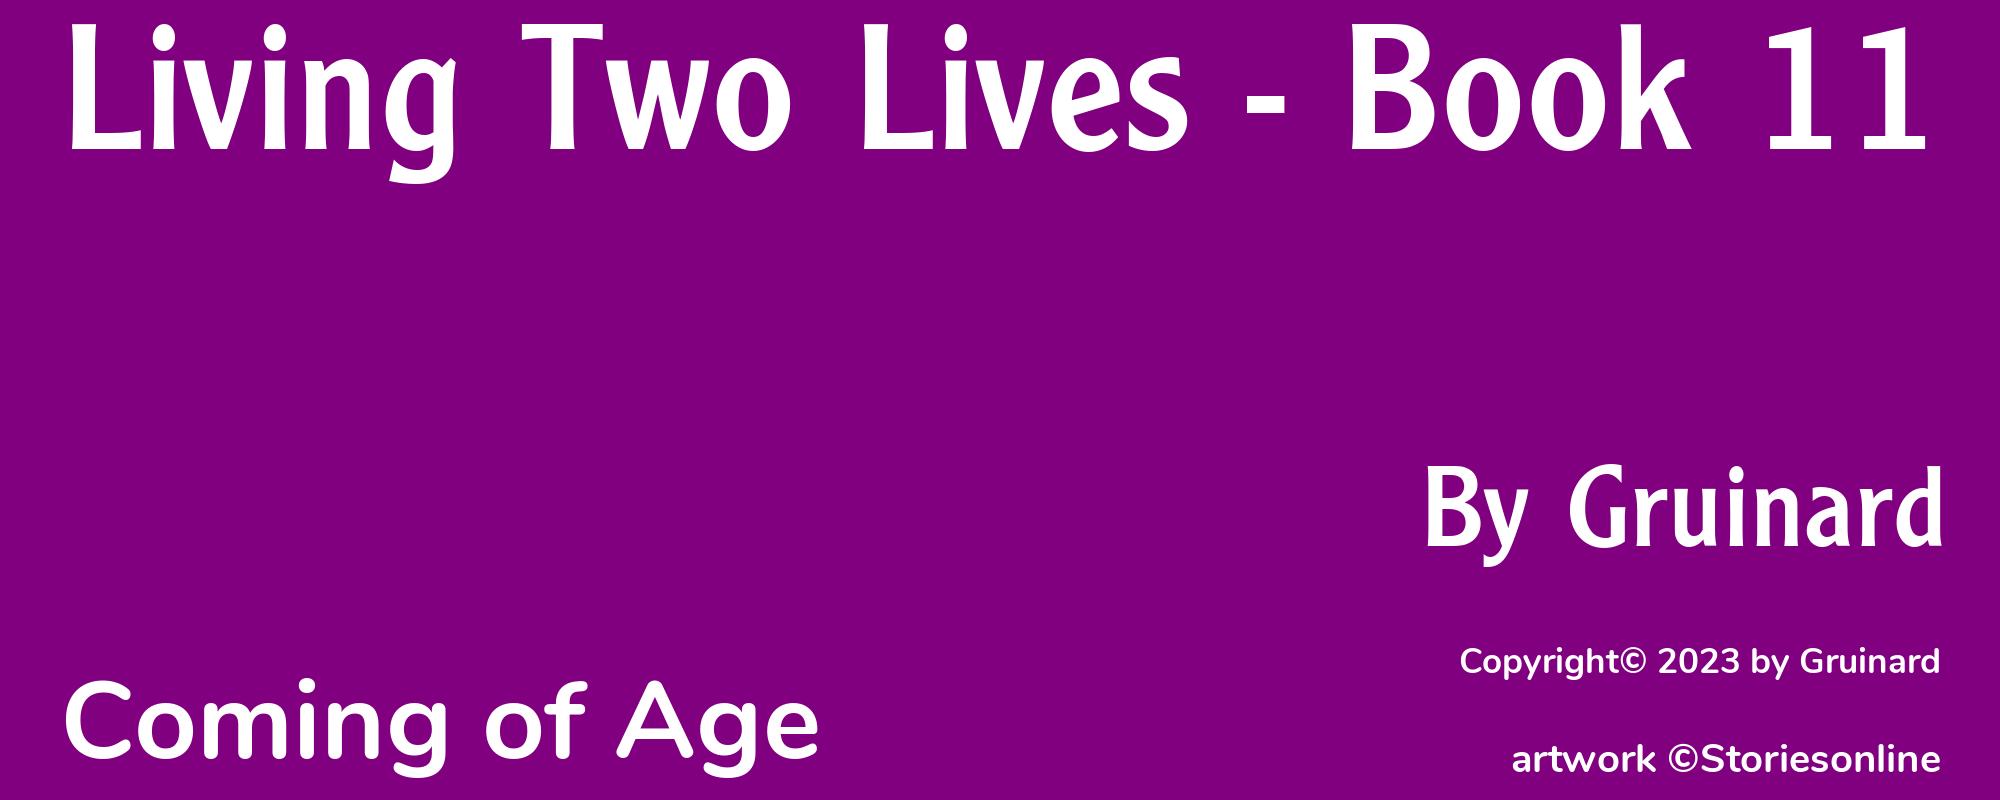 Living Two Lives - Book 11 - Cover